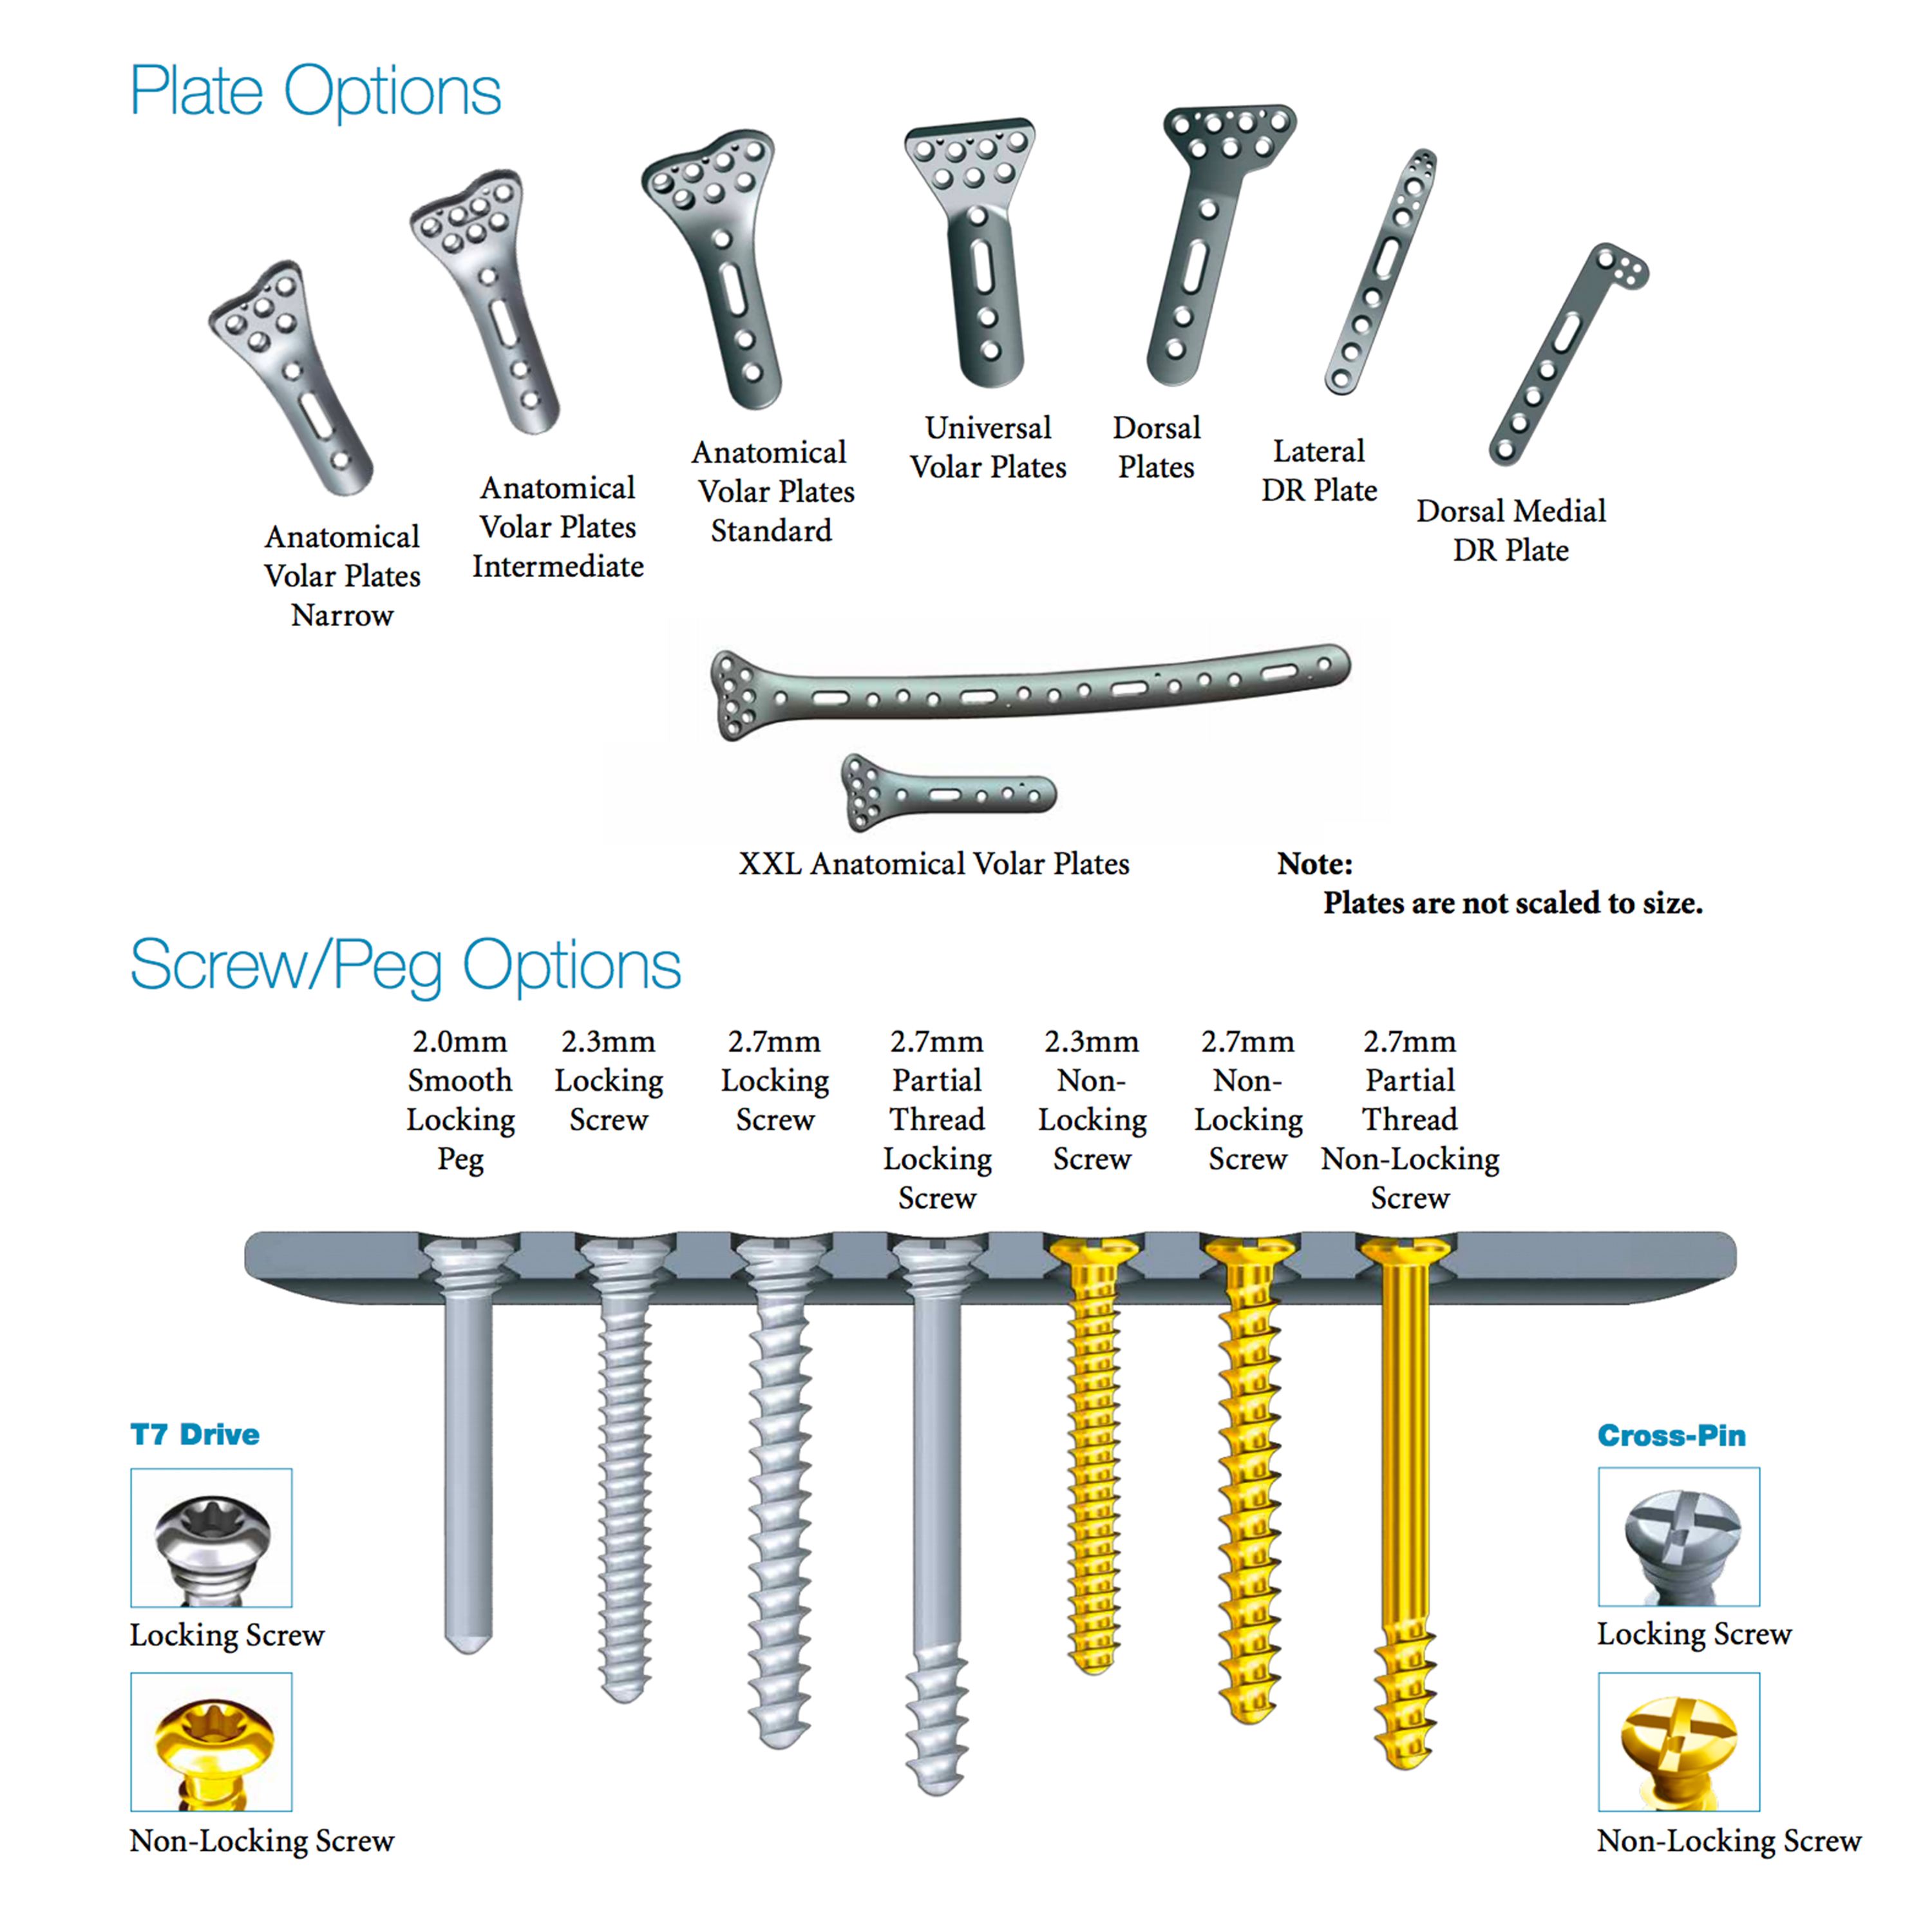 VariAx Distal Radius Locking Plate Sytem (Cross Pins & Torx Screws) | The SmartLock Locking Technology in the VariAx System is designed to encourage a locked screw to plate interface due to the combination of Grade II Titanium plates (softer) and Grade V Titanium screws/pegs (harder).